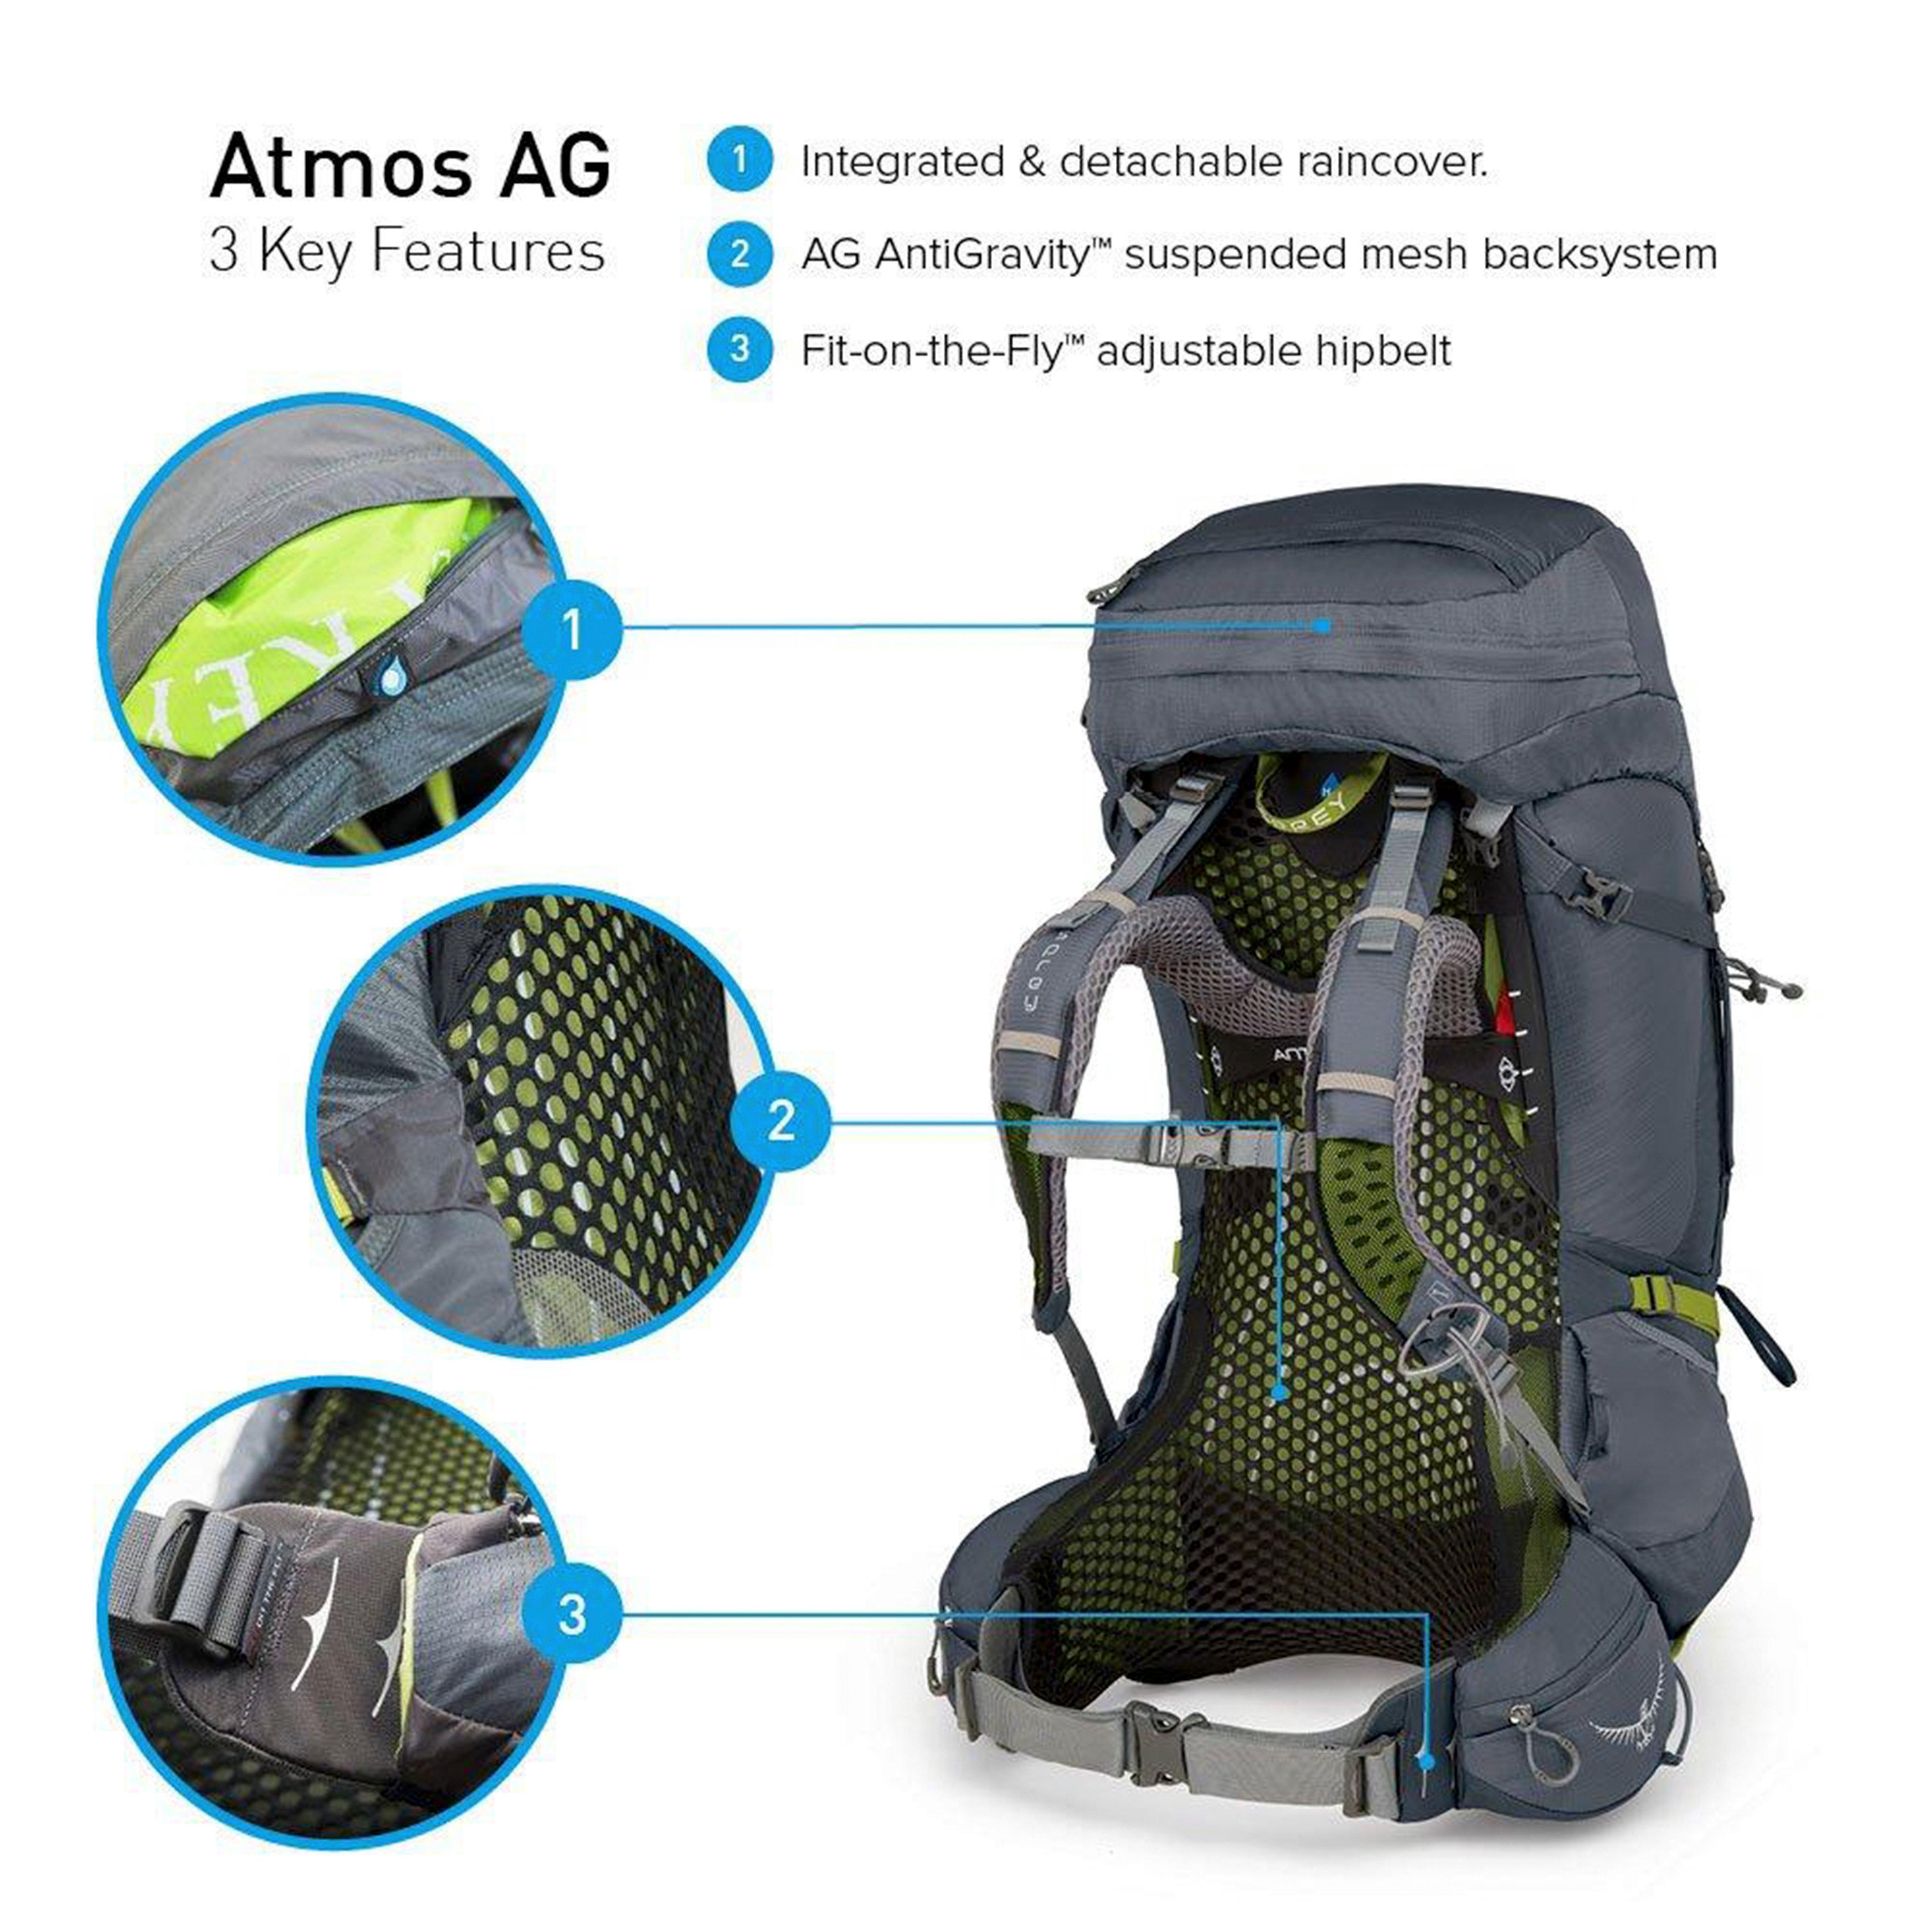 Osprey Atmos AG 65 L Backpack Review